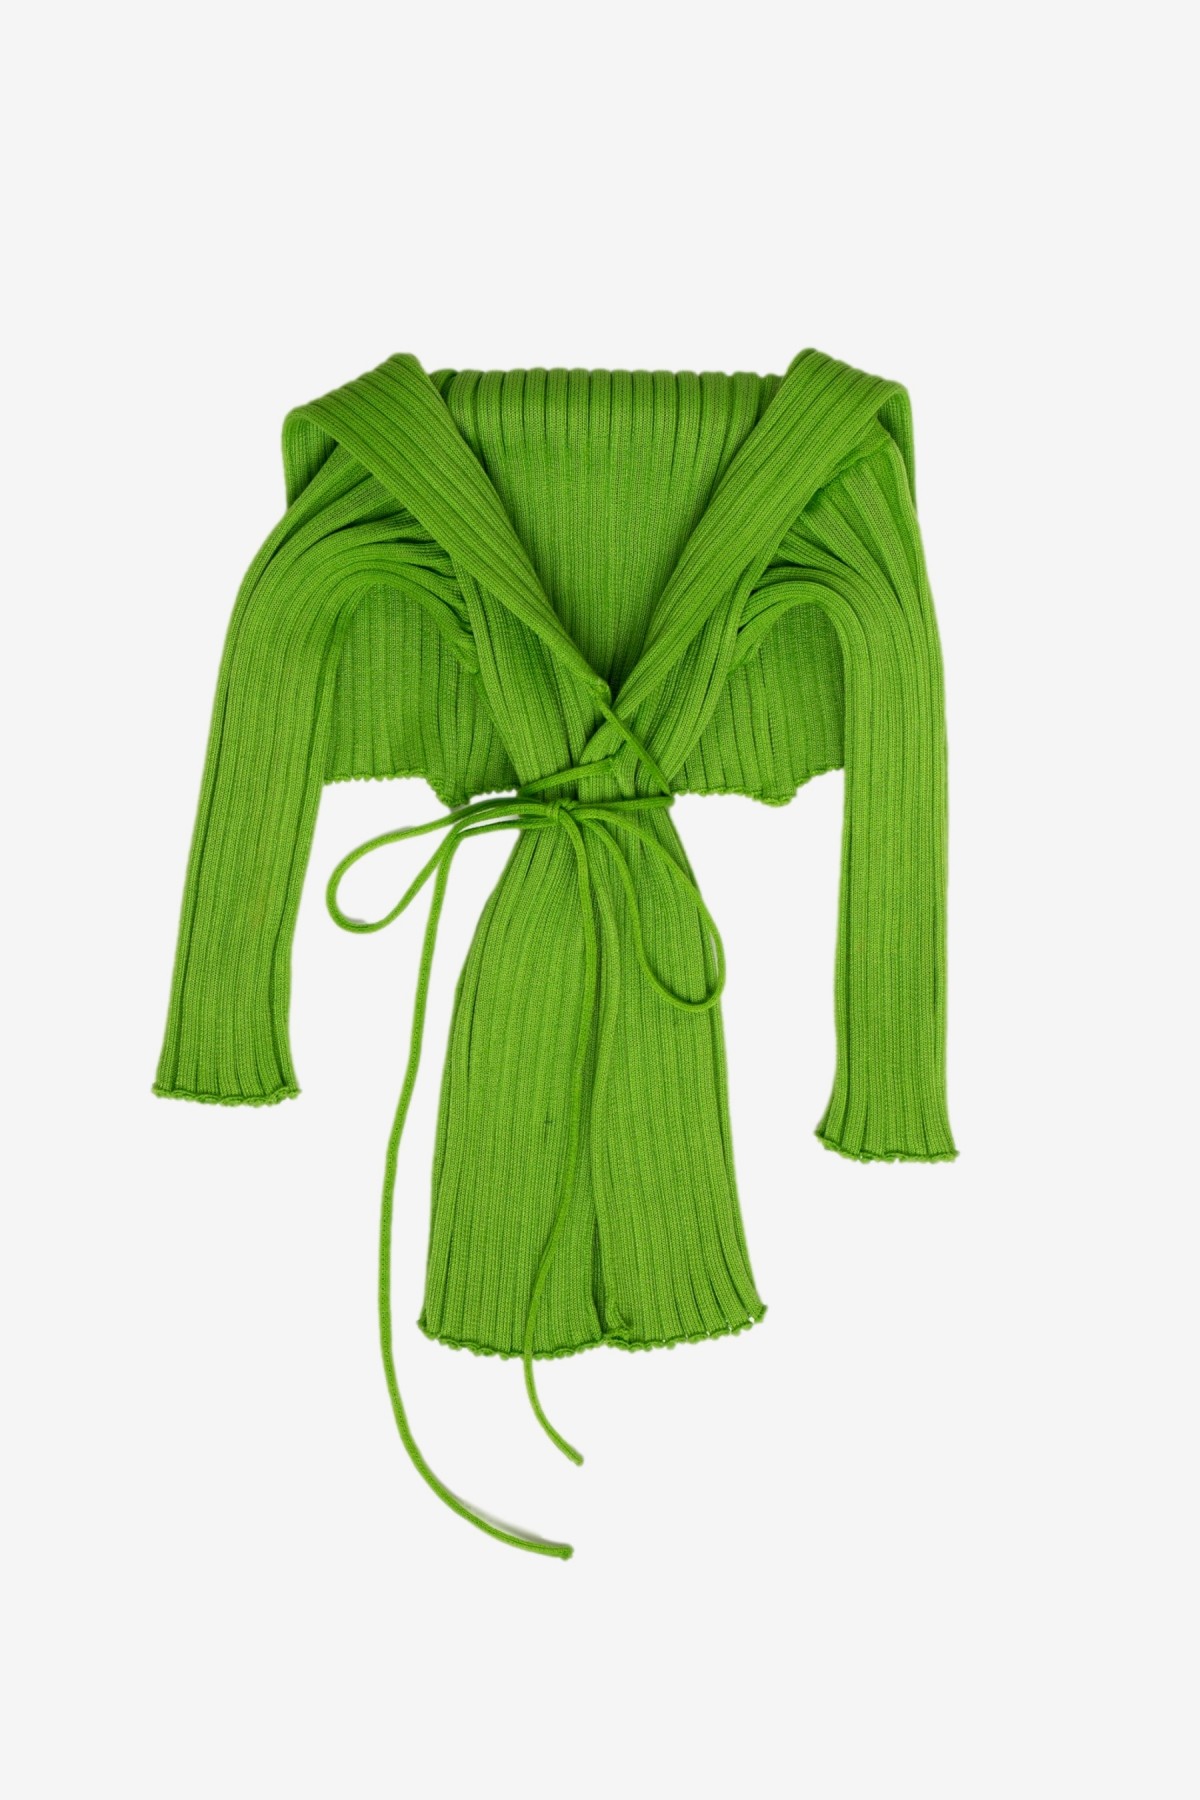 A. Roege Hove Ara Wide Collar Cardigan in Apple Green